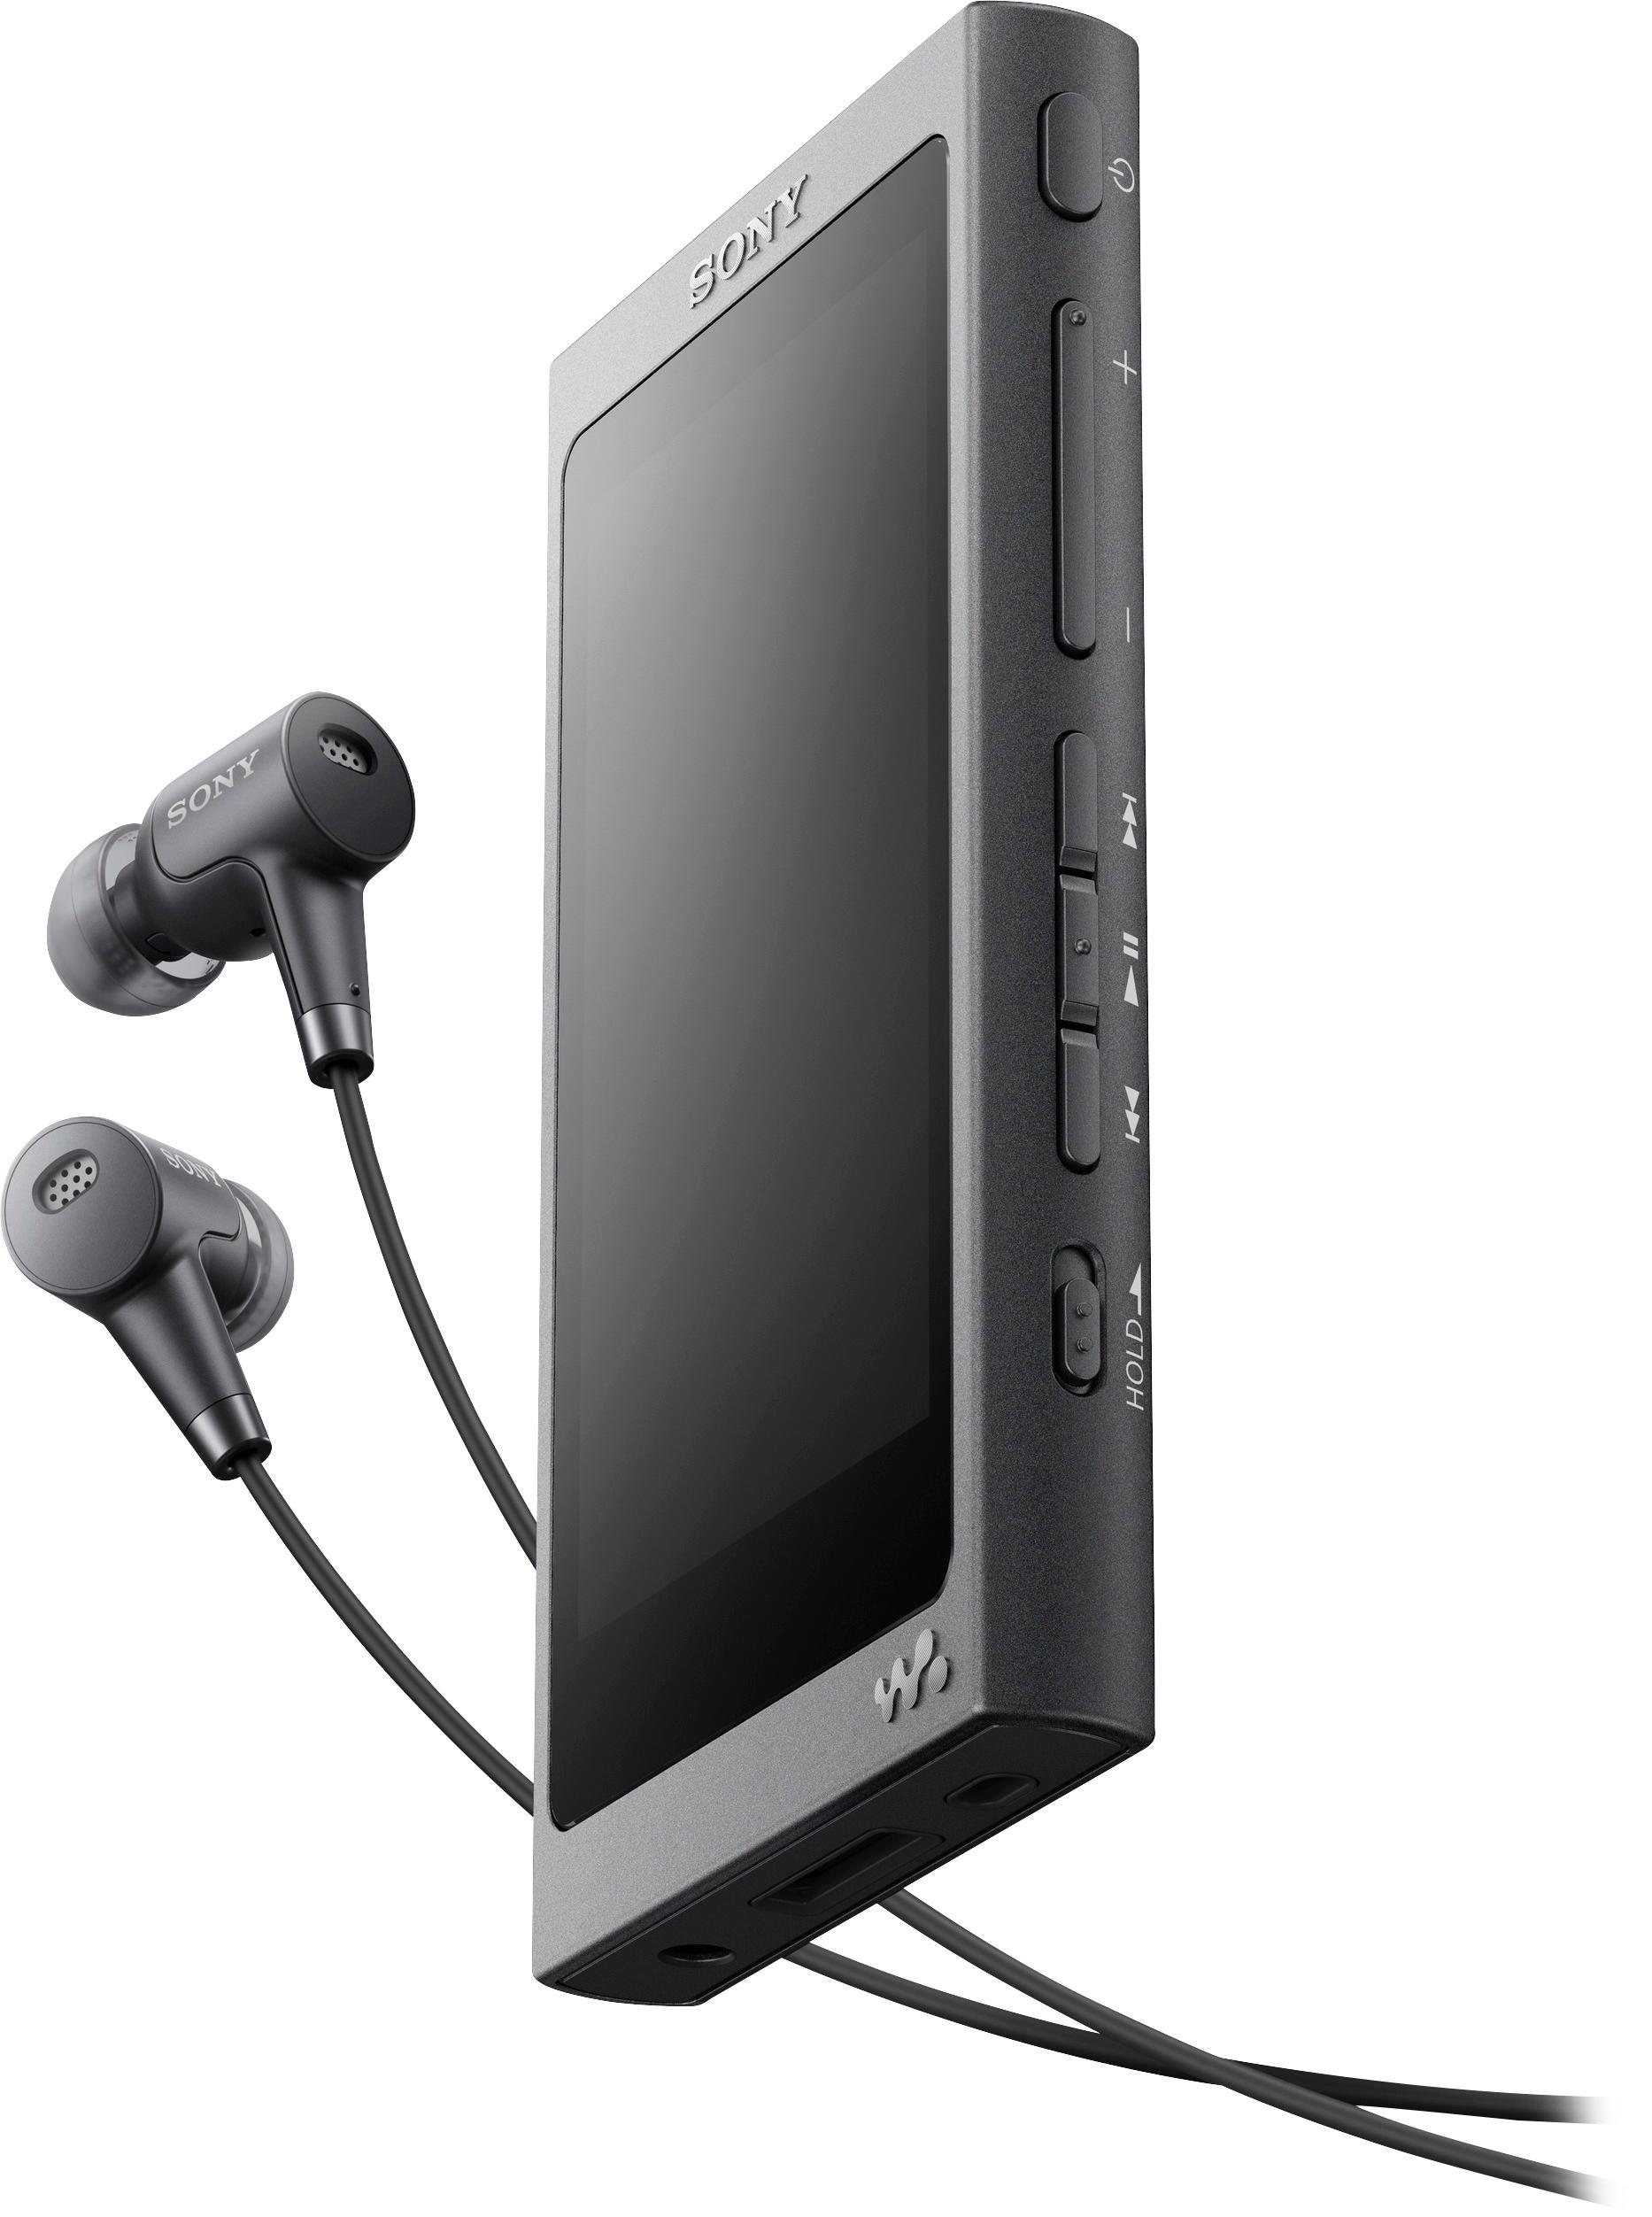 Best Buy: Sony Walkman NW-A35 Hi-Res 16GB* MP3 Player Charcoal 